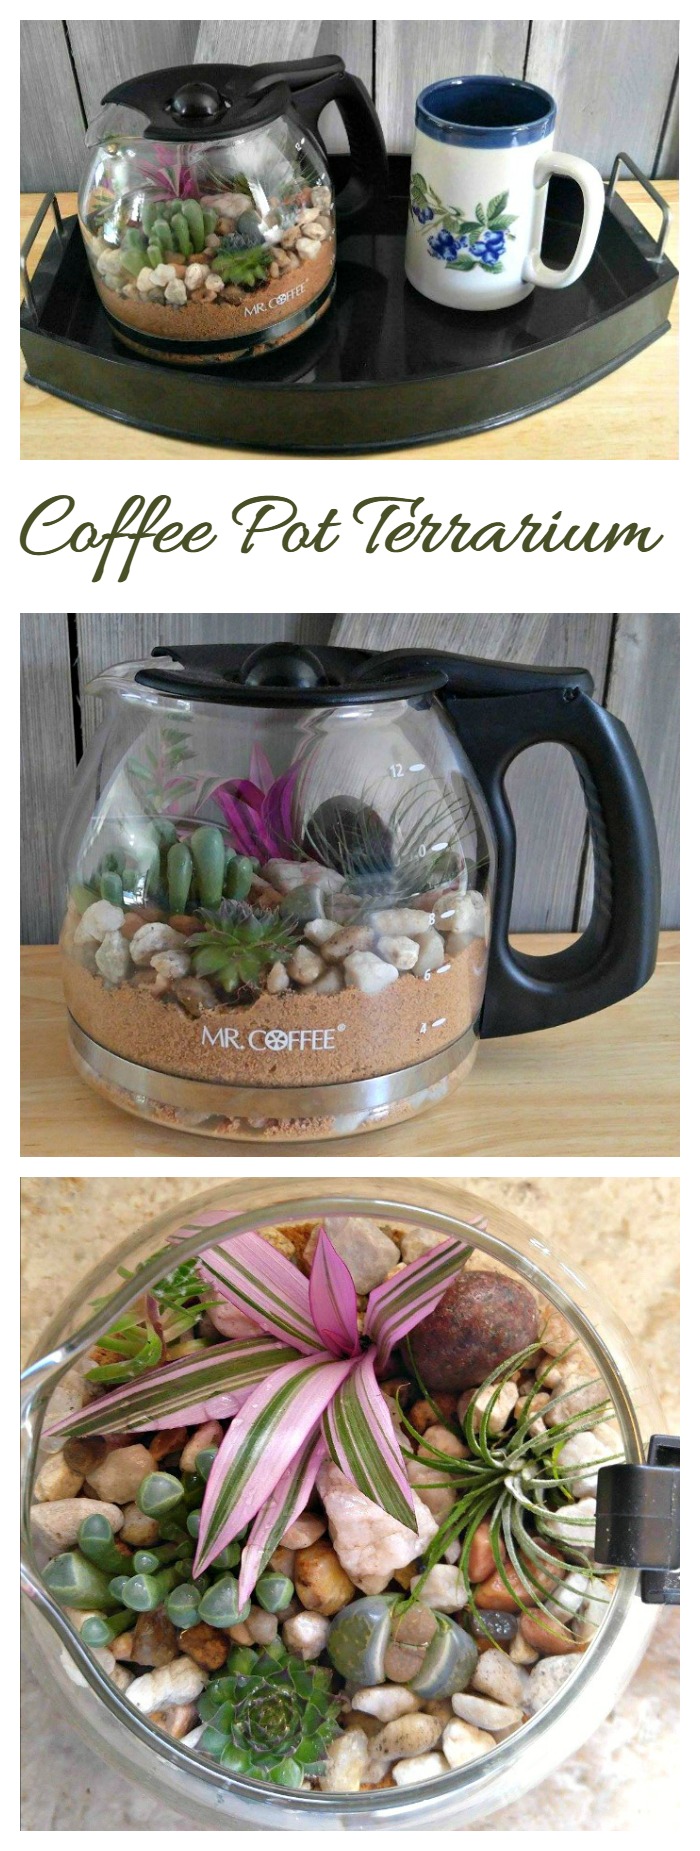 This Coffee pot Terrarium is a fun way to add some pretty plant decor. It keeps the humidity level right so that watering is not needed very often.